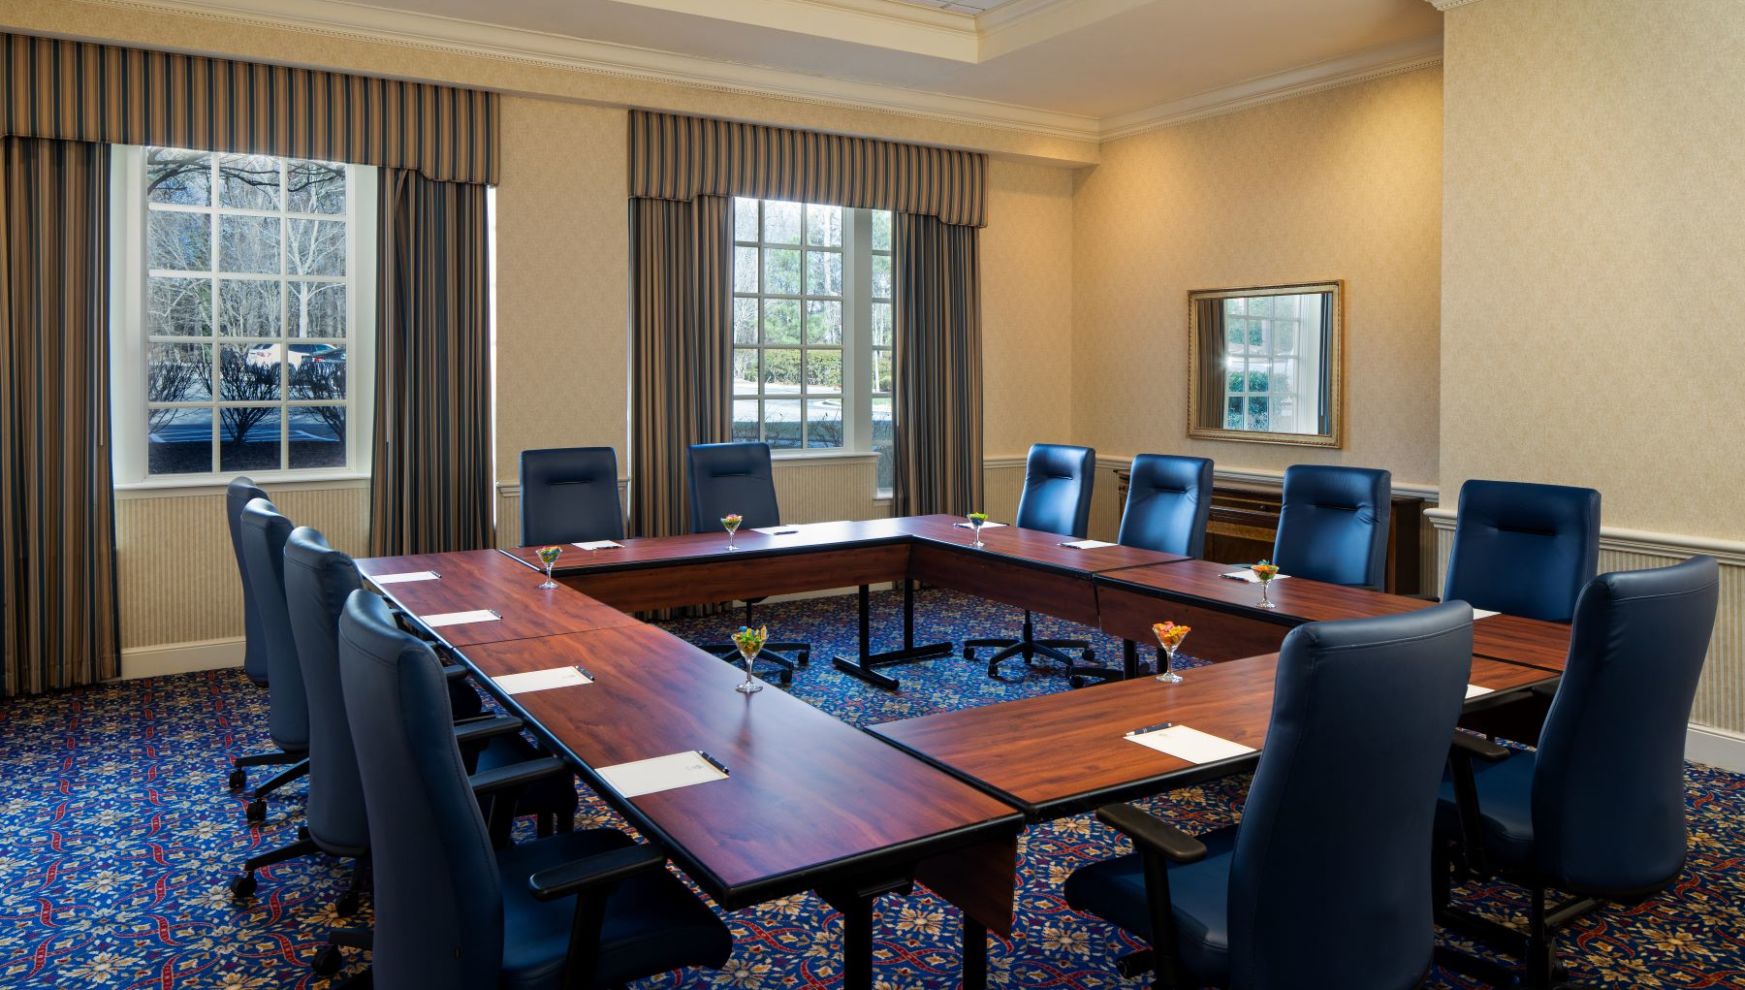 A Conference Room With A Large Table